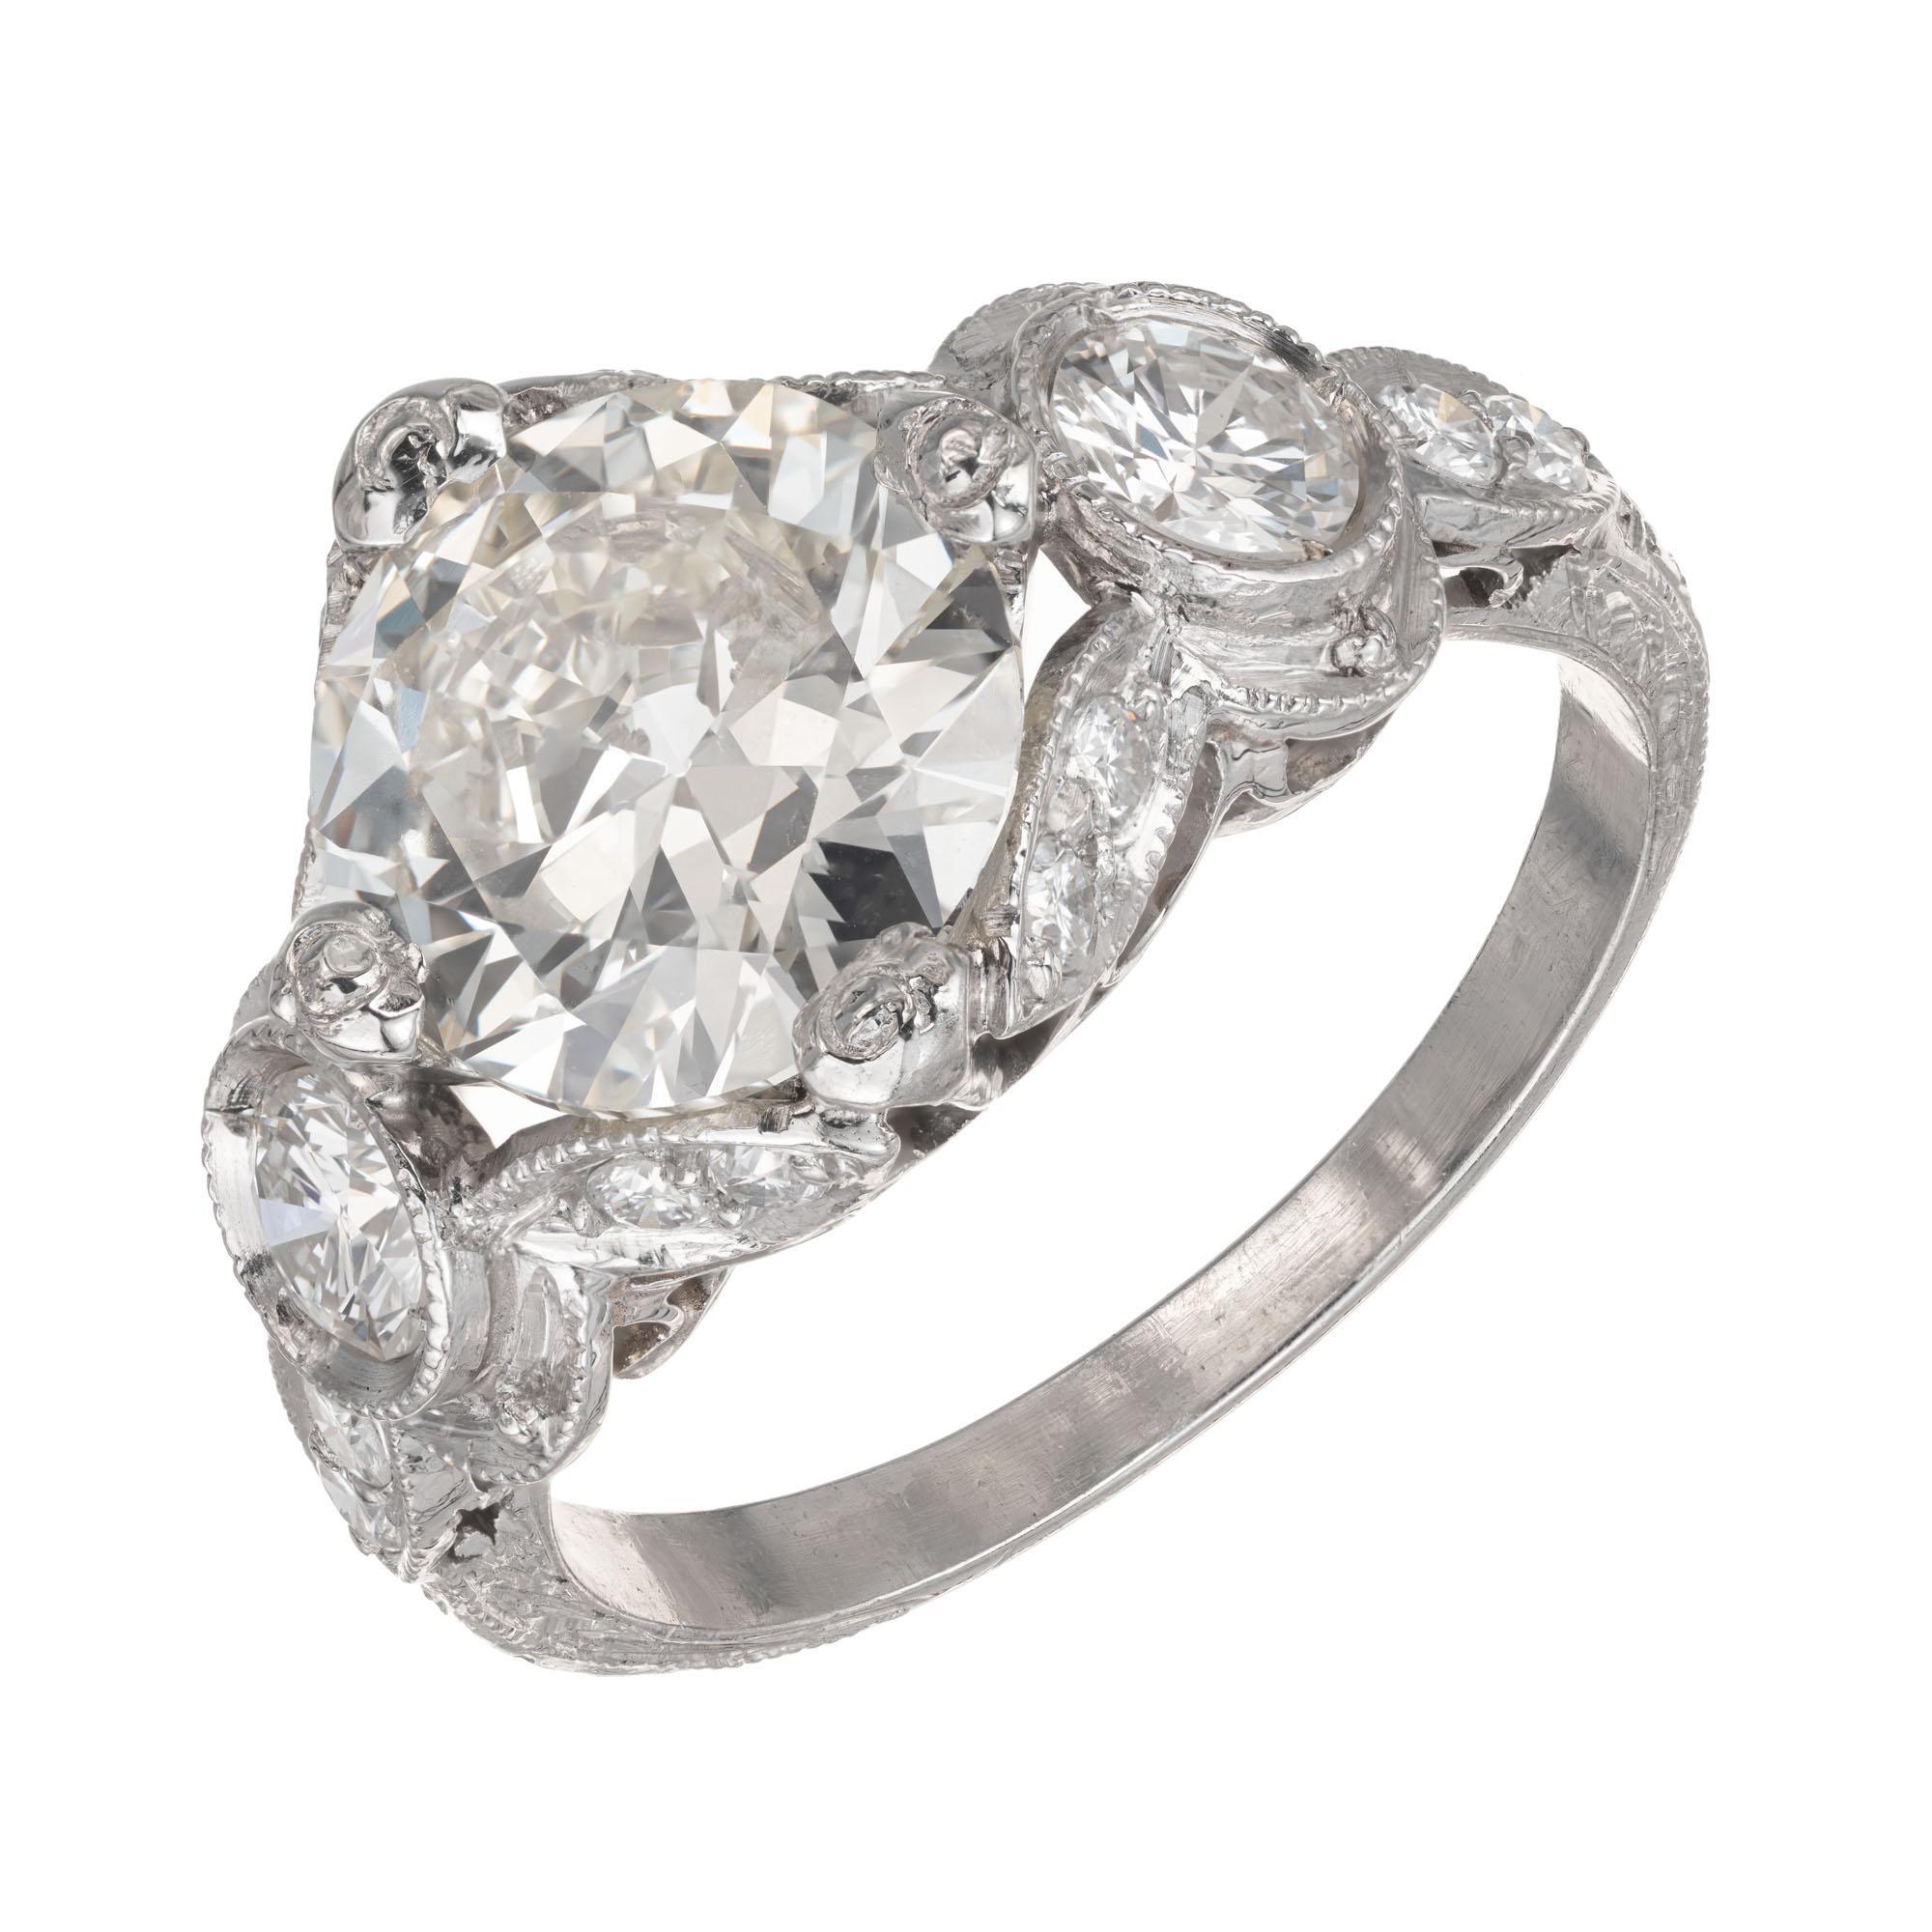 Platinum Art Deco 1930s  2.59 ct Transitional Cut Diamond engagement ring. Original solid Platinum open work and hand engraving setting with a round brilliant diamond center stone, accented with two round brilliant cut side diamonds. . 

1 GIA